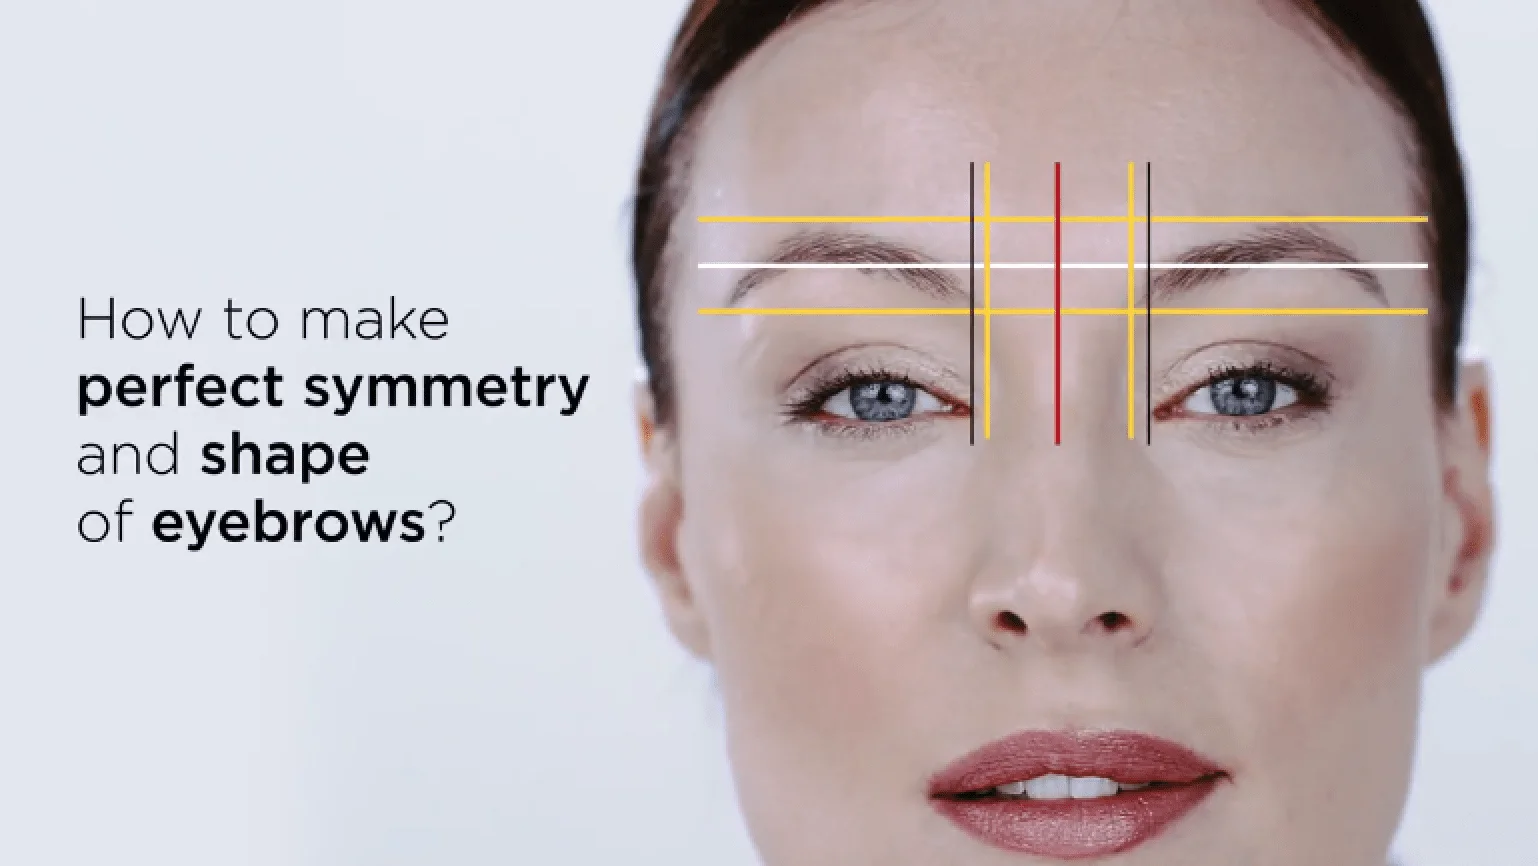 PHIBROWS BB COMPASS AND EYEBROWS SYMMETRY